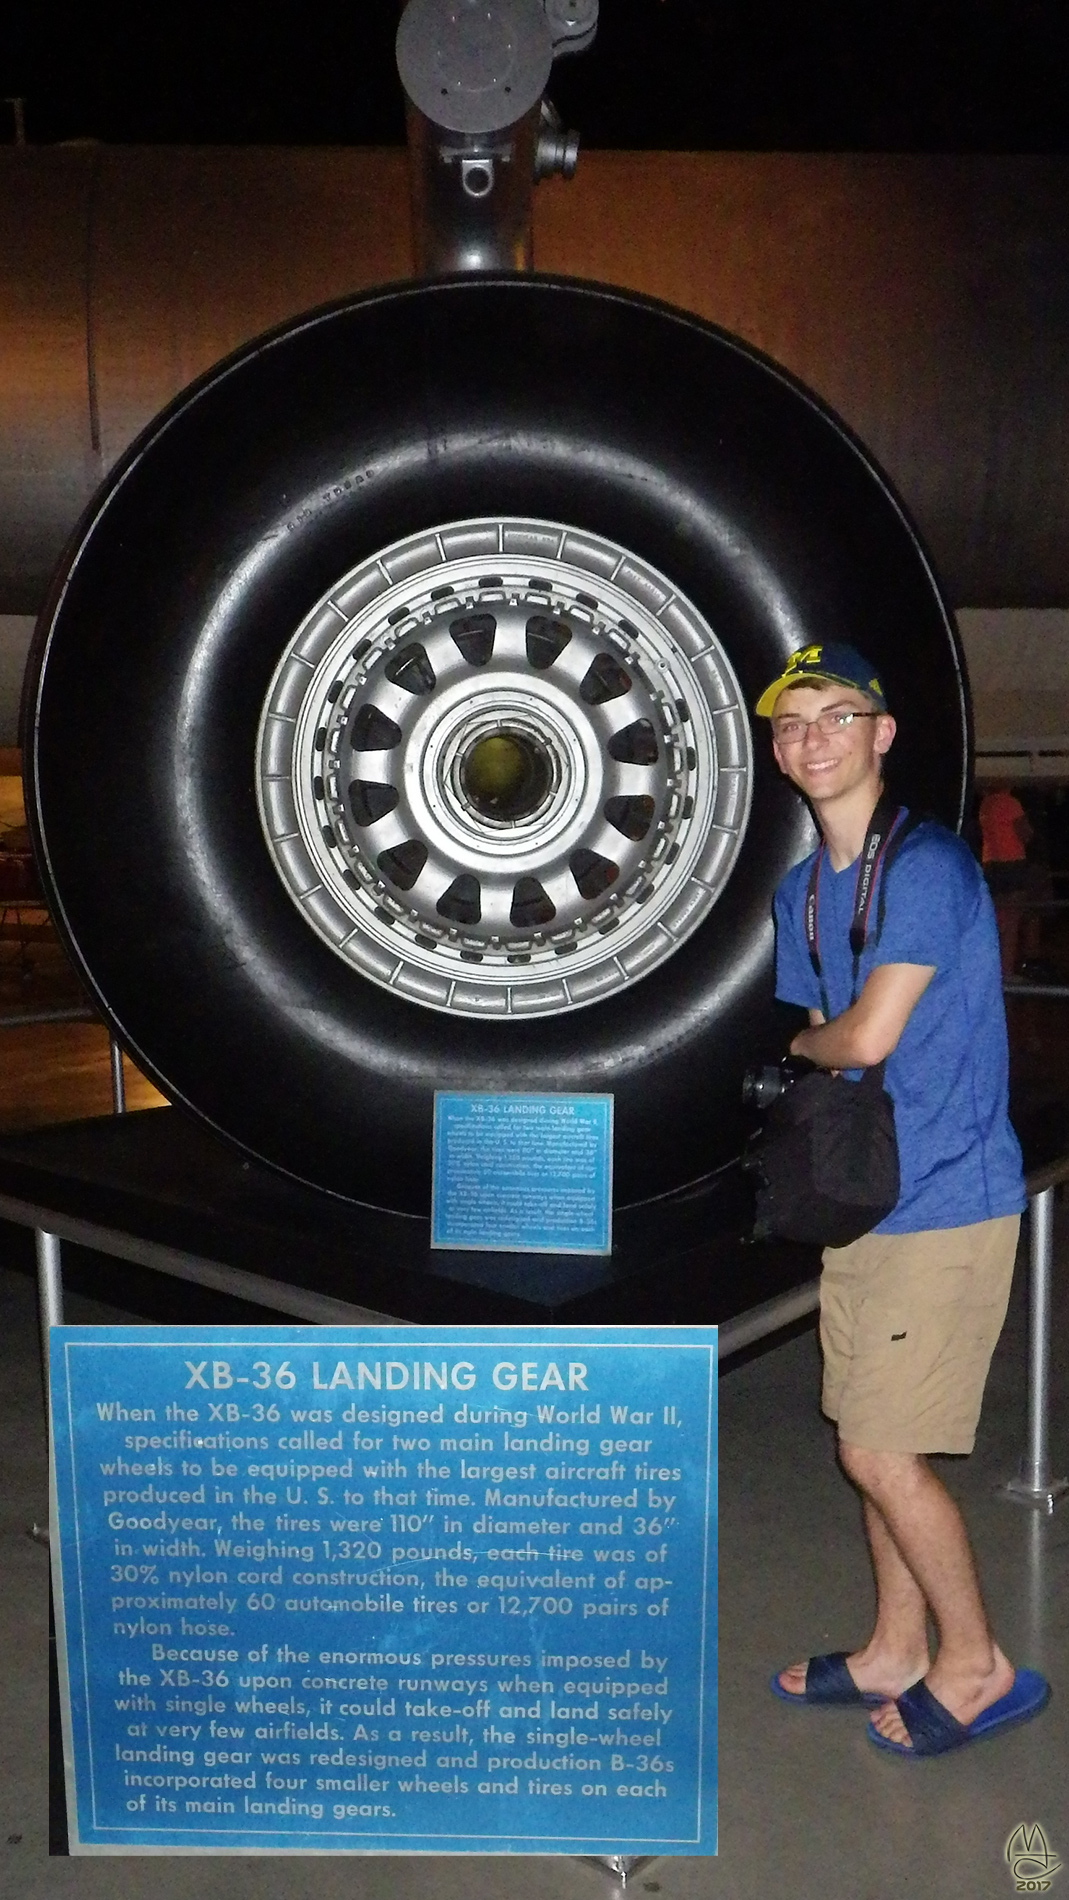 B-36 tire. Banana for scale.